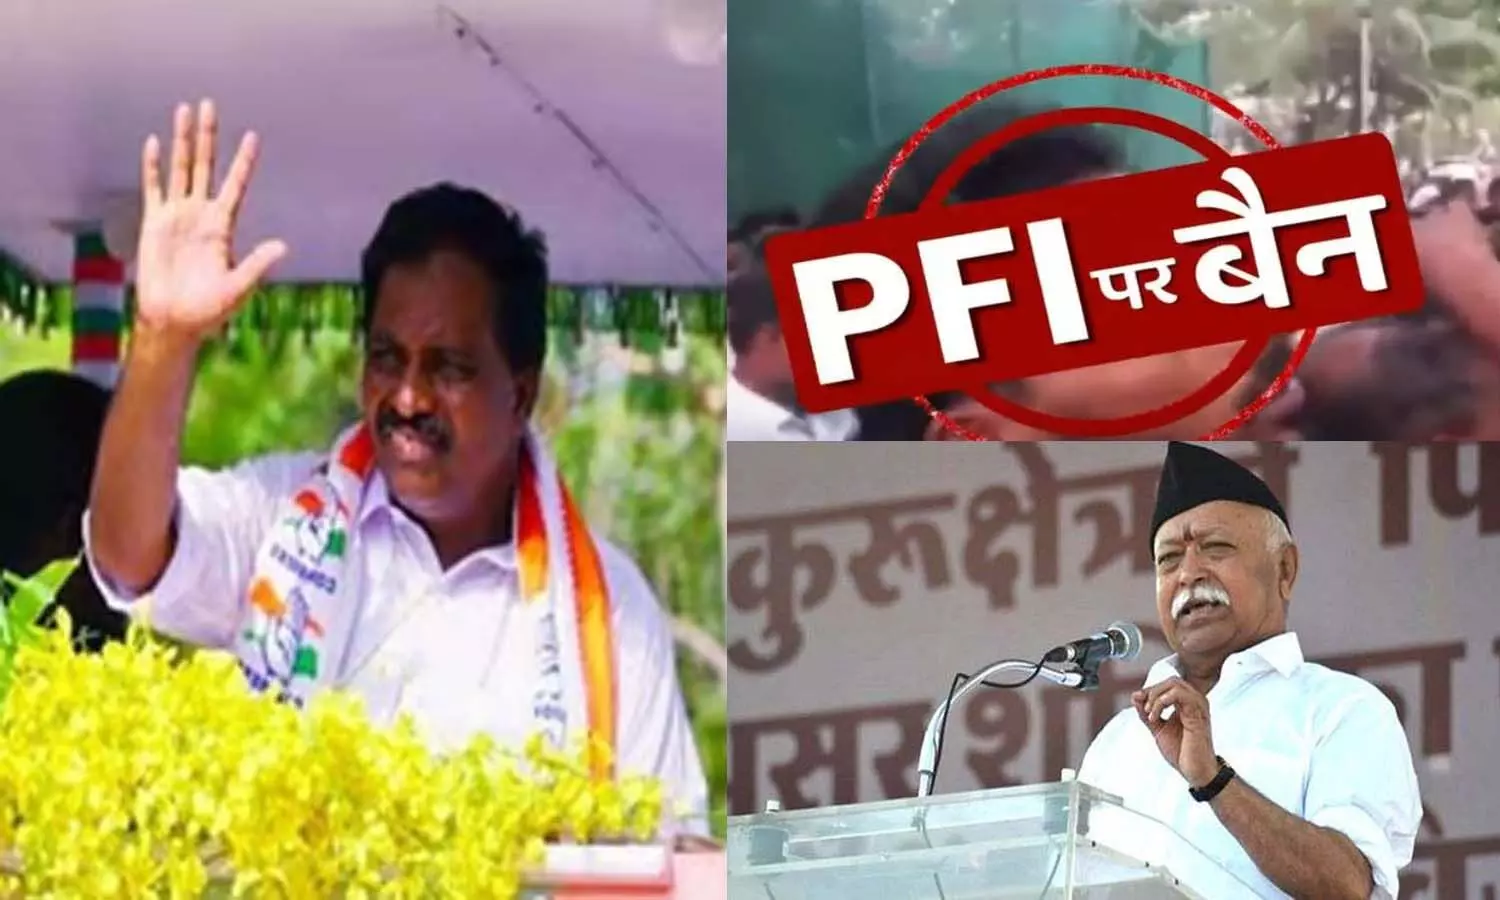 RSS is spreading Hindu communalism in the country, like PFI, it should also be banned, Congress MP demands